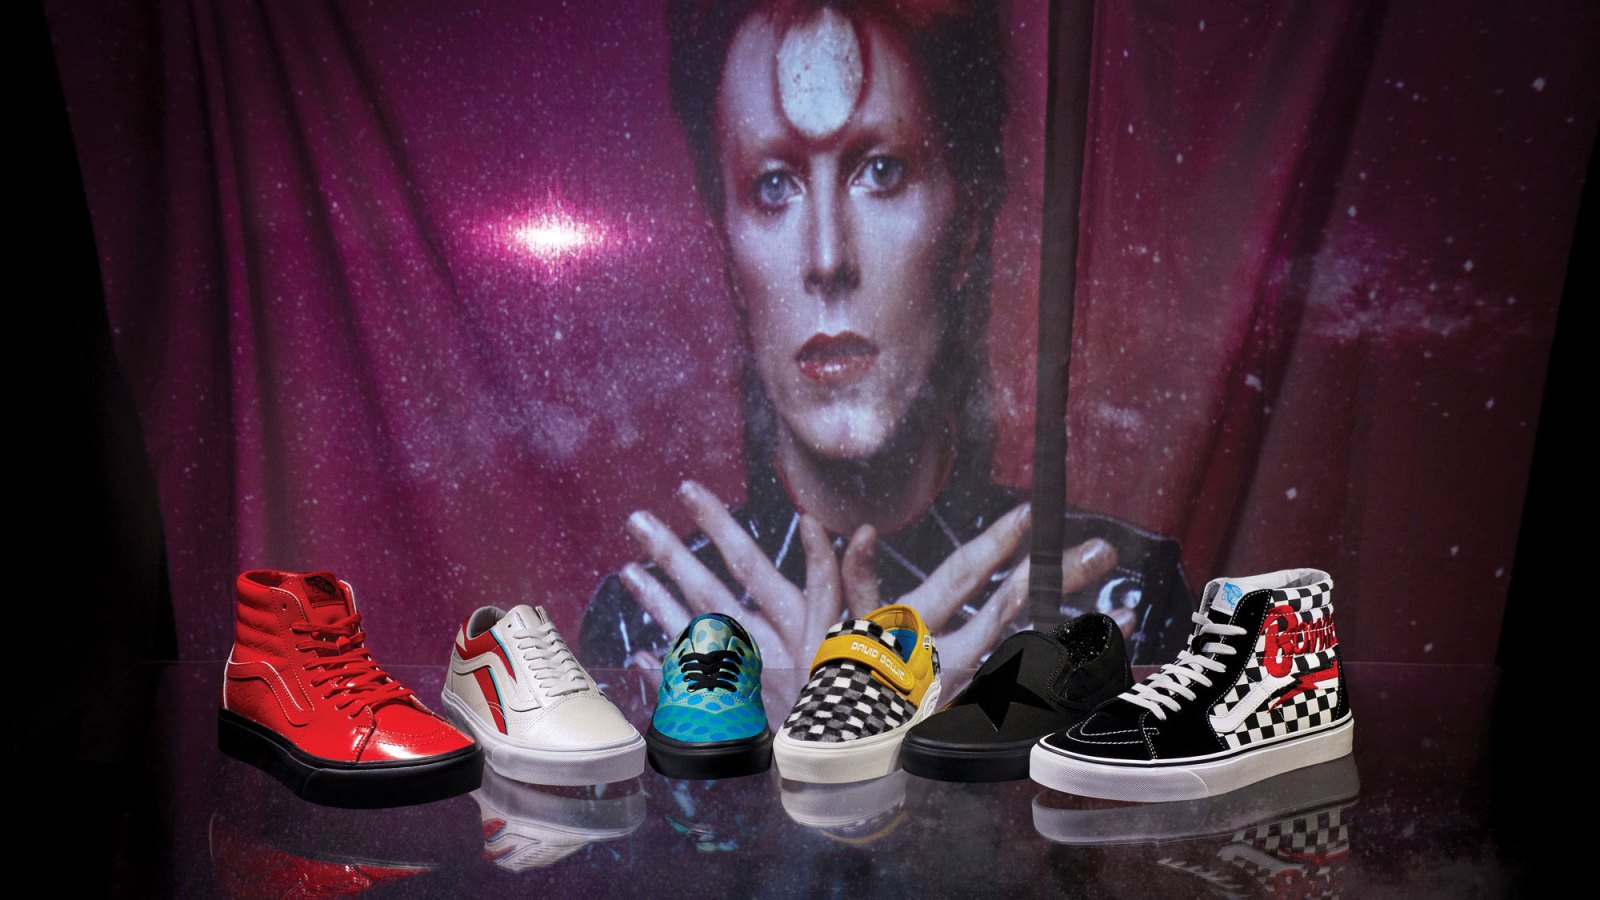 Vans Is Honoring David Bowie With a Limited-Edition Footwear and Apparel Collection